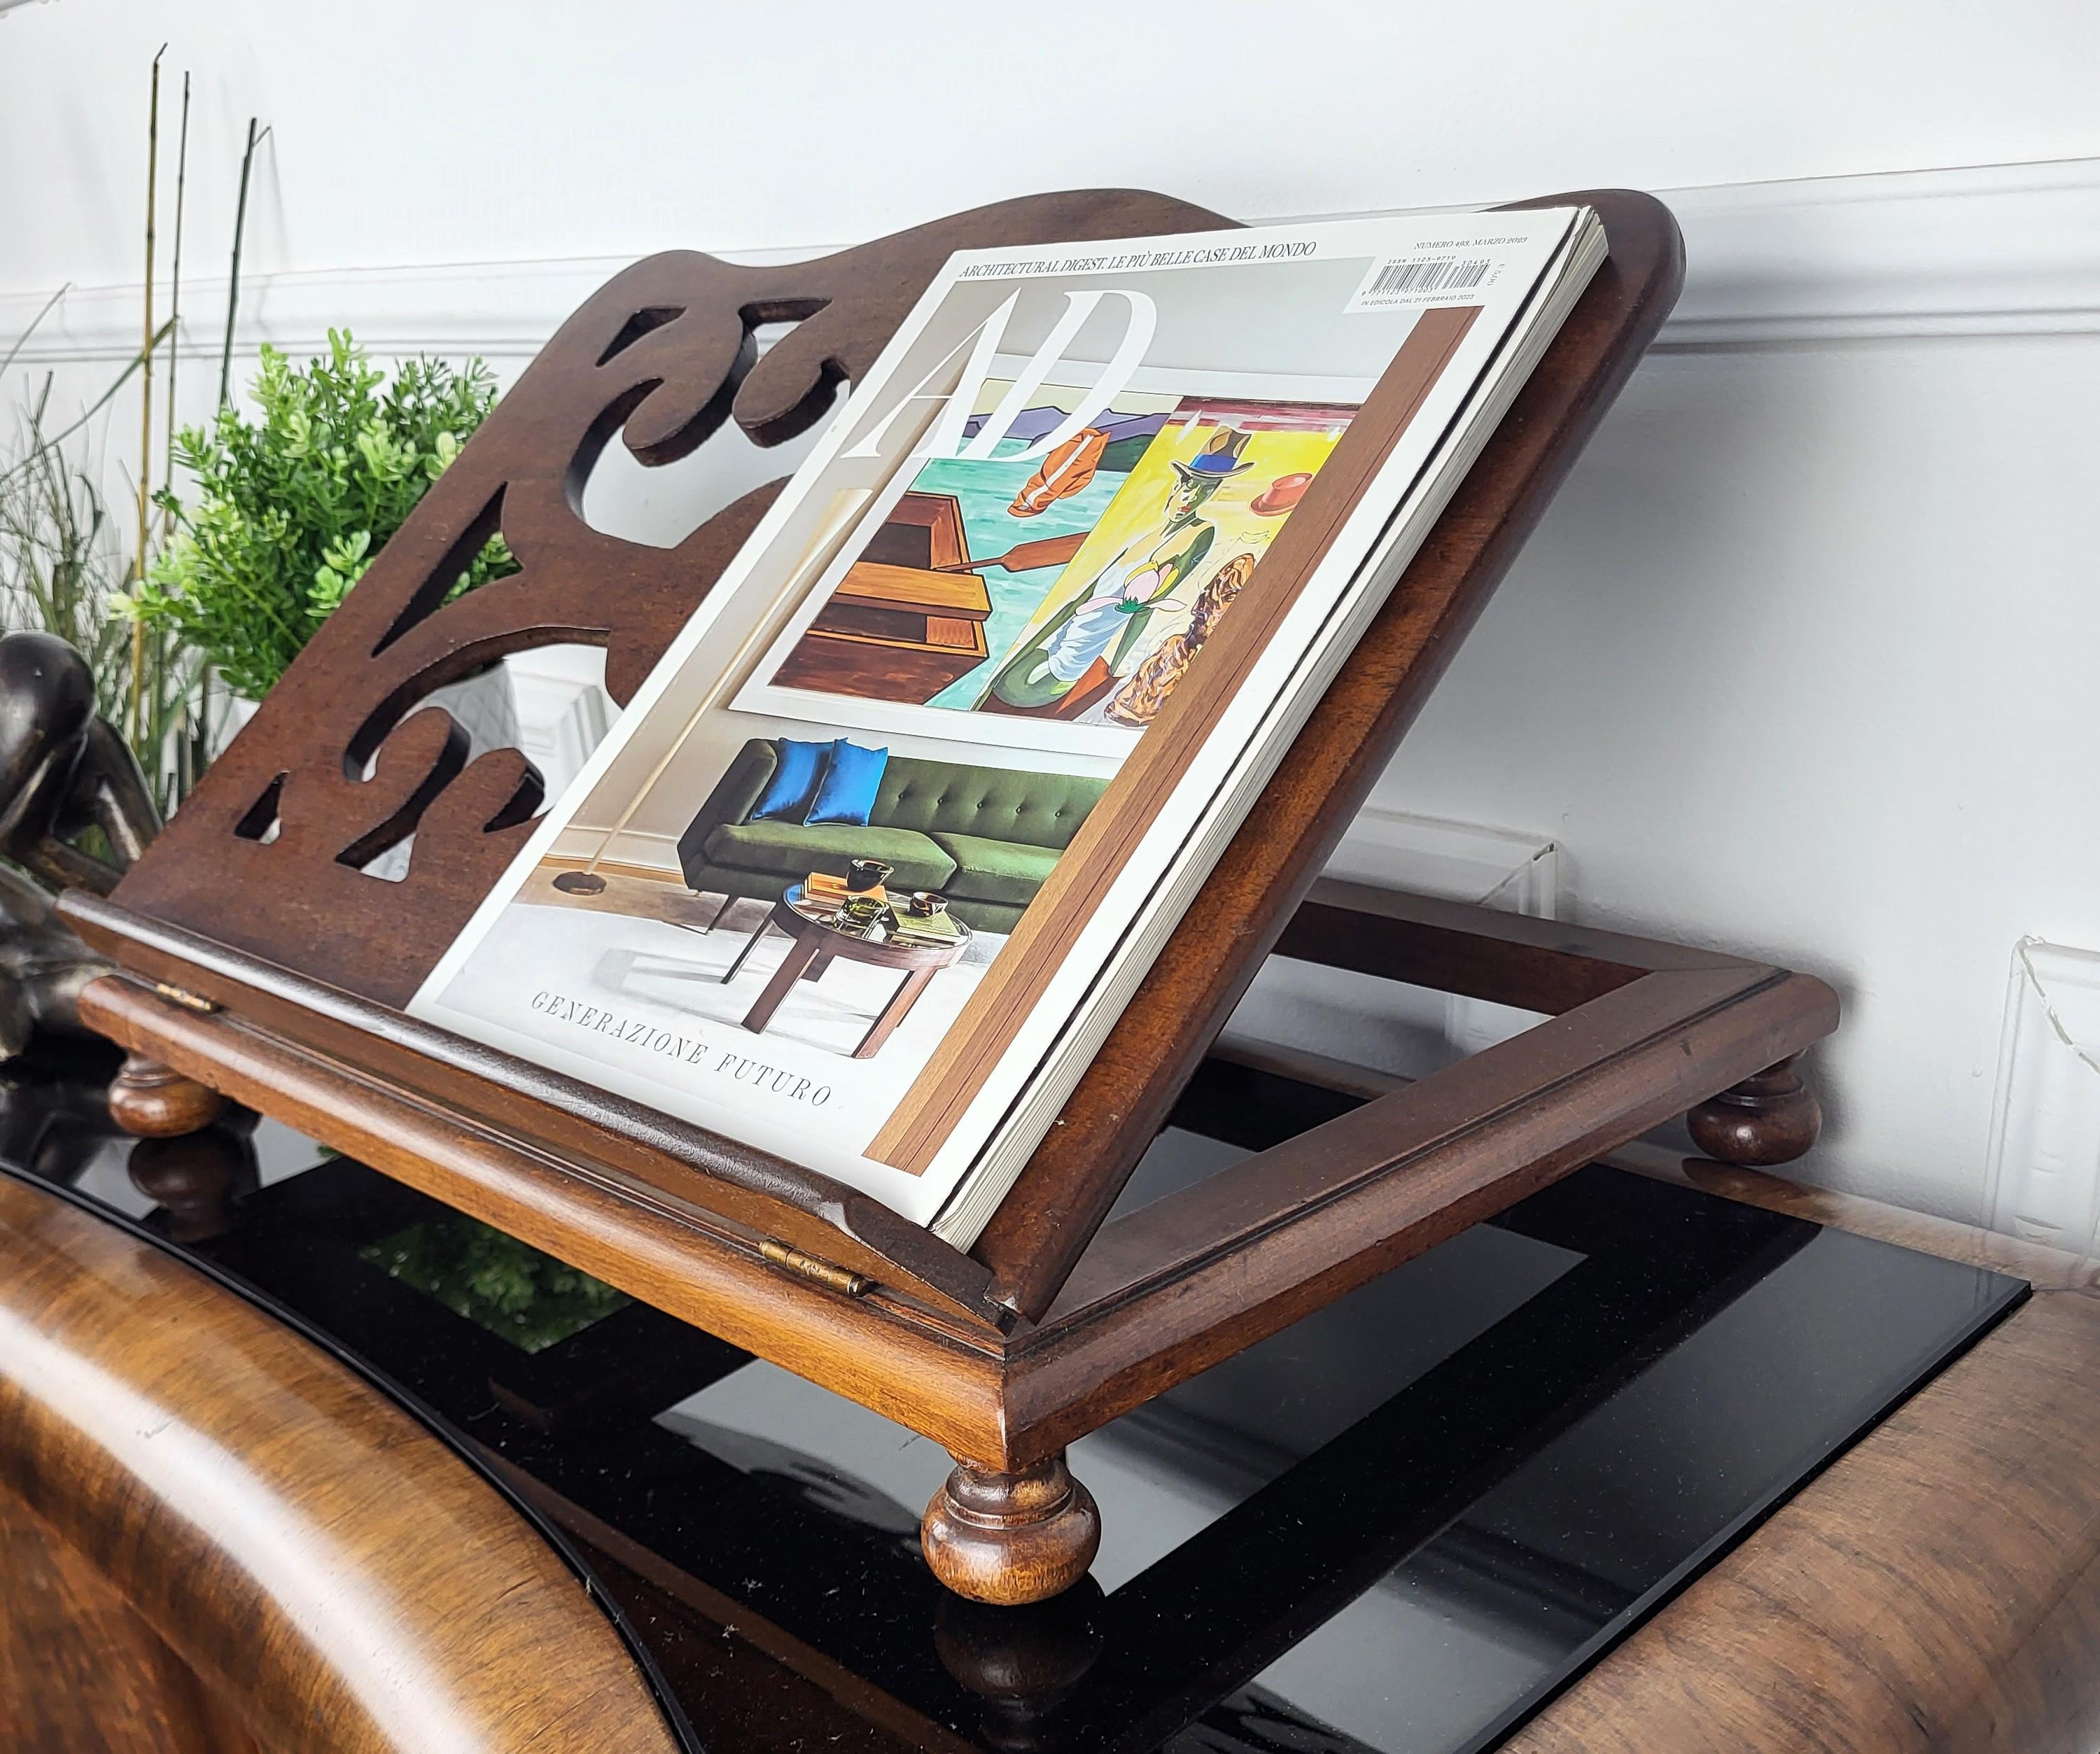 If you are looking for the perfect way to display a book or photo or otherwise then this unique and decorative bookstand could be ideal, beautifully crafted and detailed in the frames, bun feet and with its warm patina. It can look great on a large